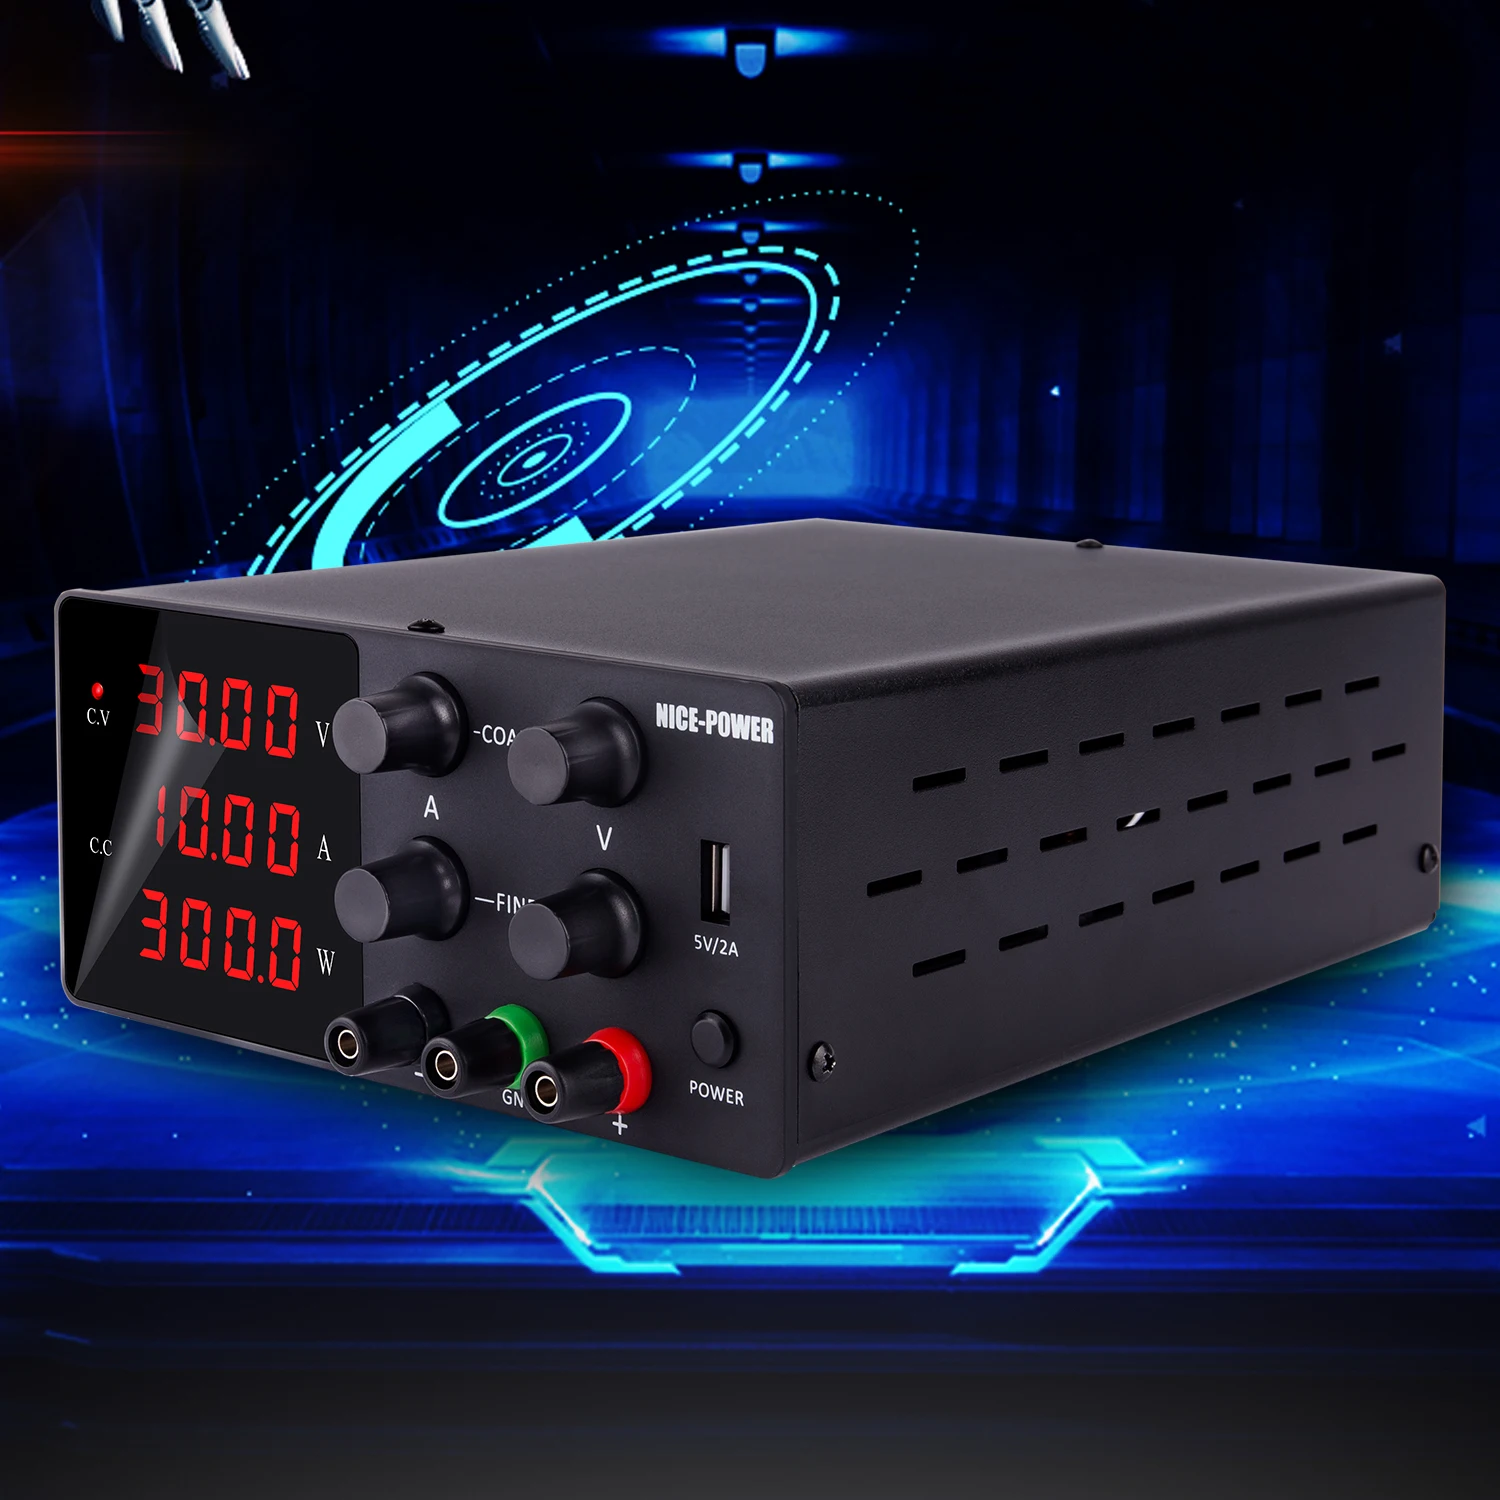 S6477263afccd4a81a3176527e96294f6J DC Power Supplies Adjustable Switching Voltage Regulator 30V10A/30V5A Laboratory Power Supply USB Interface LED Drone Charging